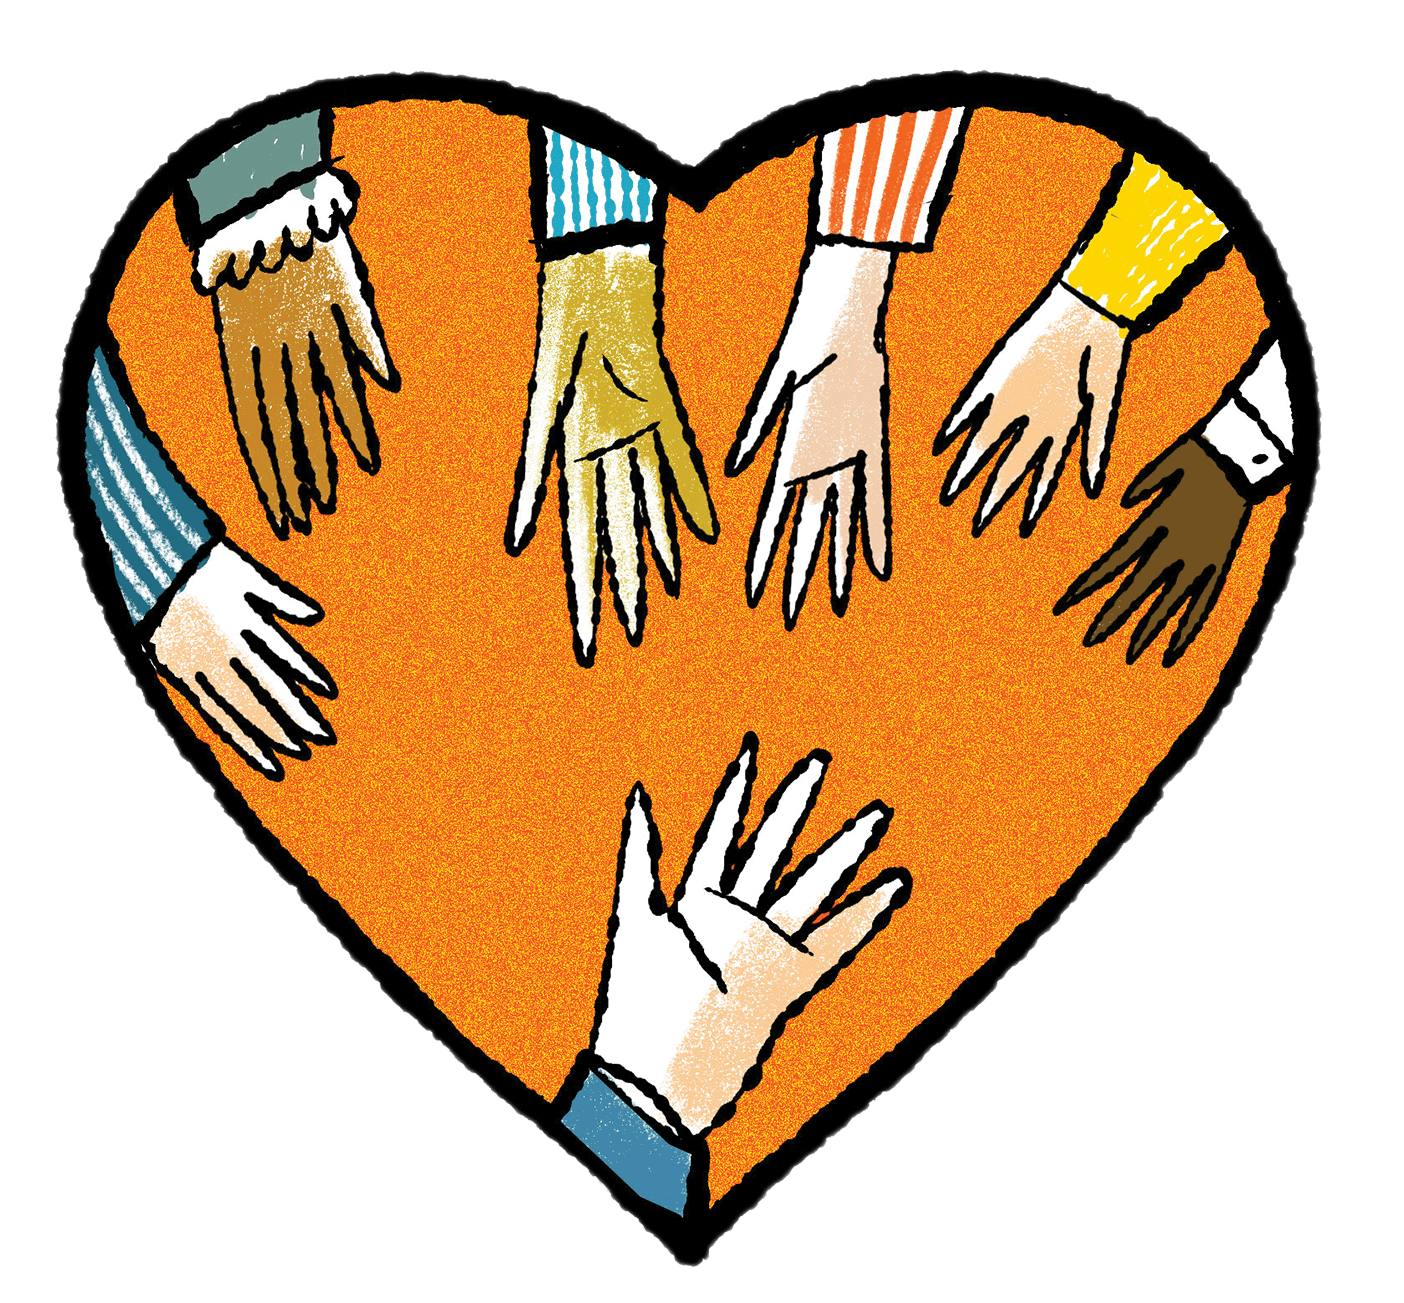 An illustration of a group of hands reaching out toward one other hand, all inside a big heart.